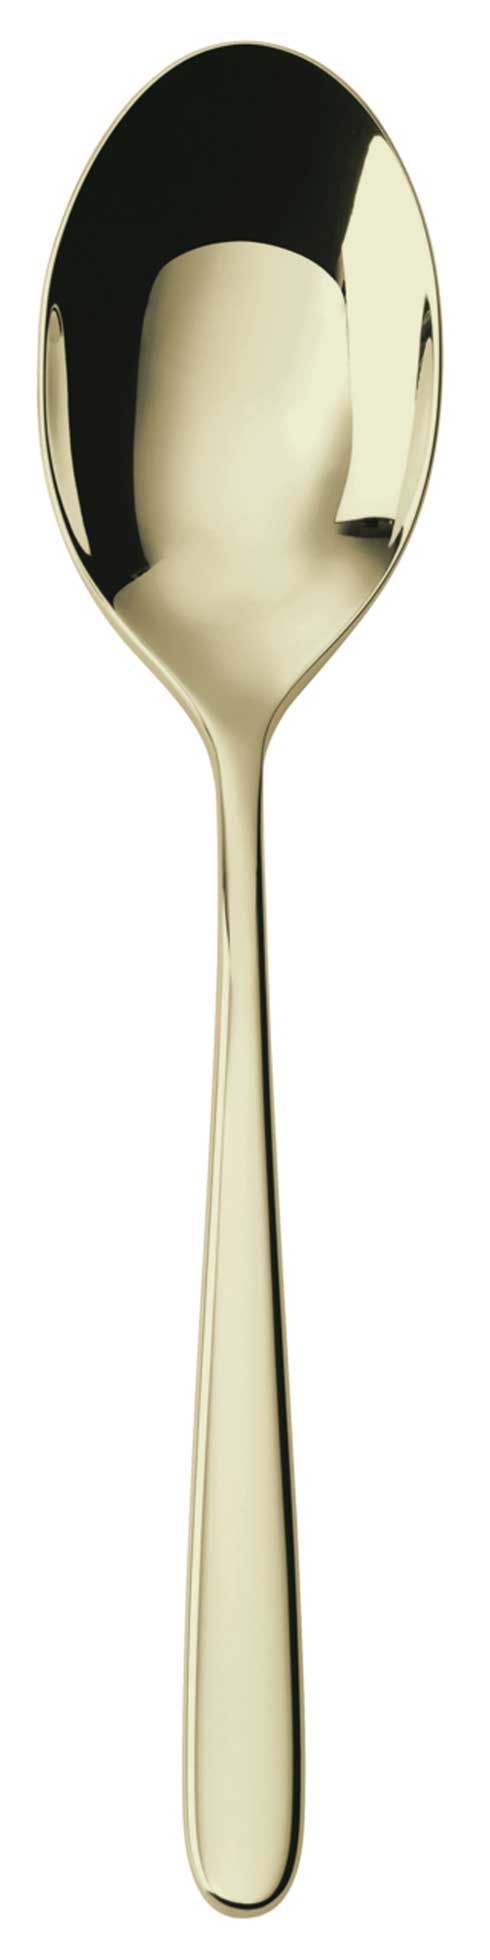 $57.00 Champagne - Serving Spoon on 18/10 s/s - PVD Champagne